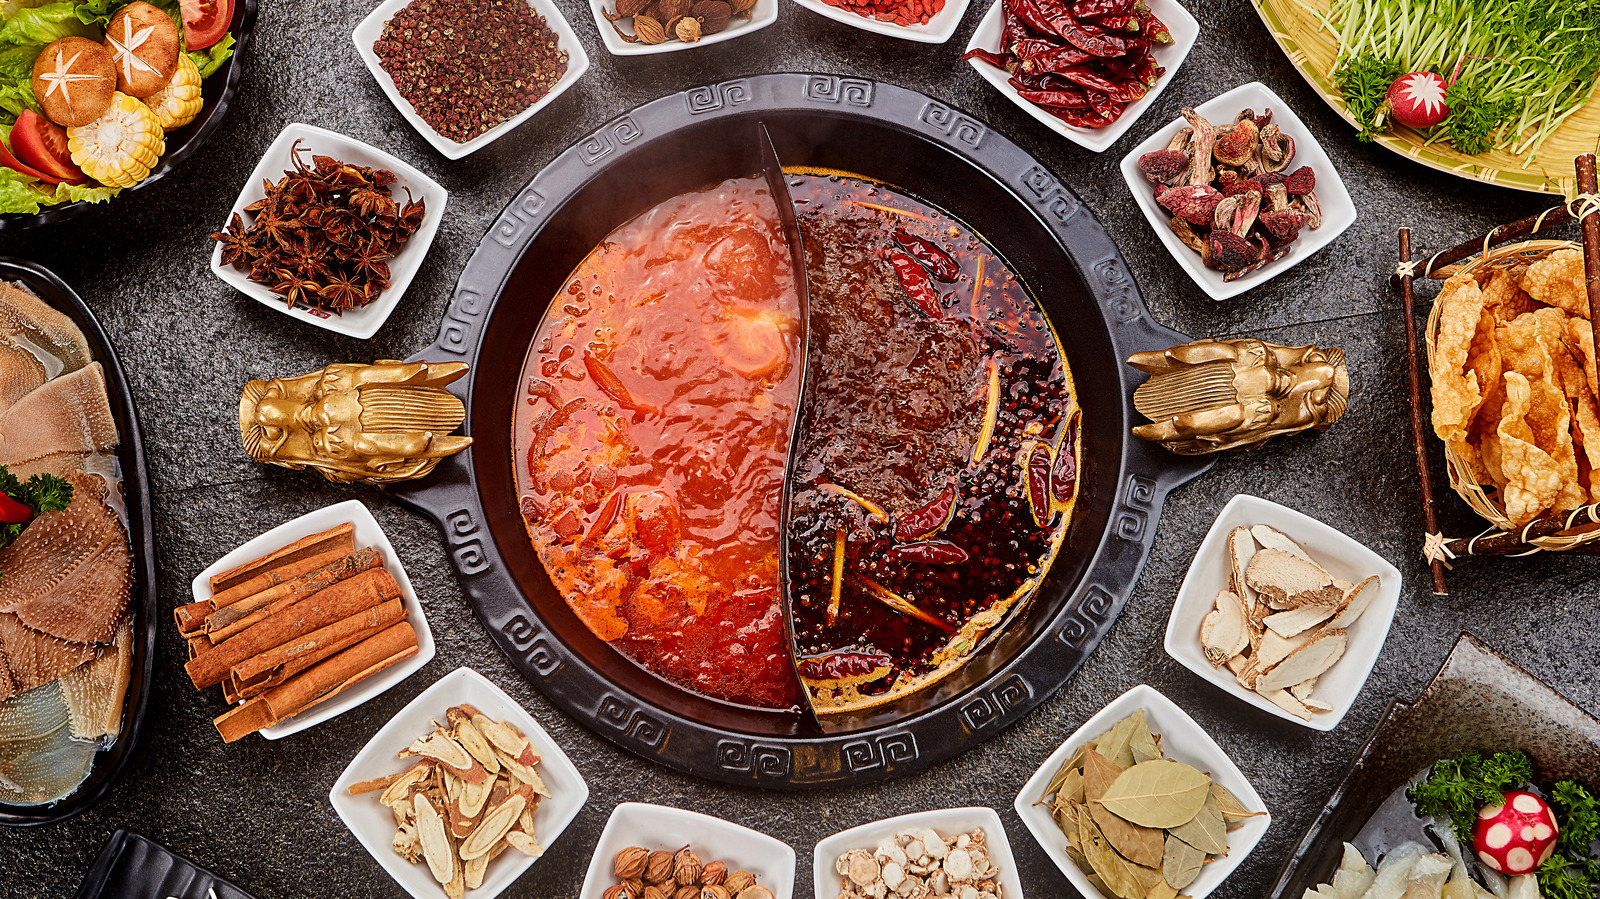 https://www.tastingtable.com/img/gallery/14-facts-you-need-to-know-about-hot-pot/l-intro-1681931538.jpg